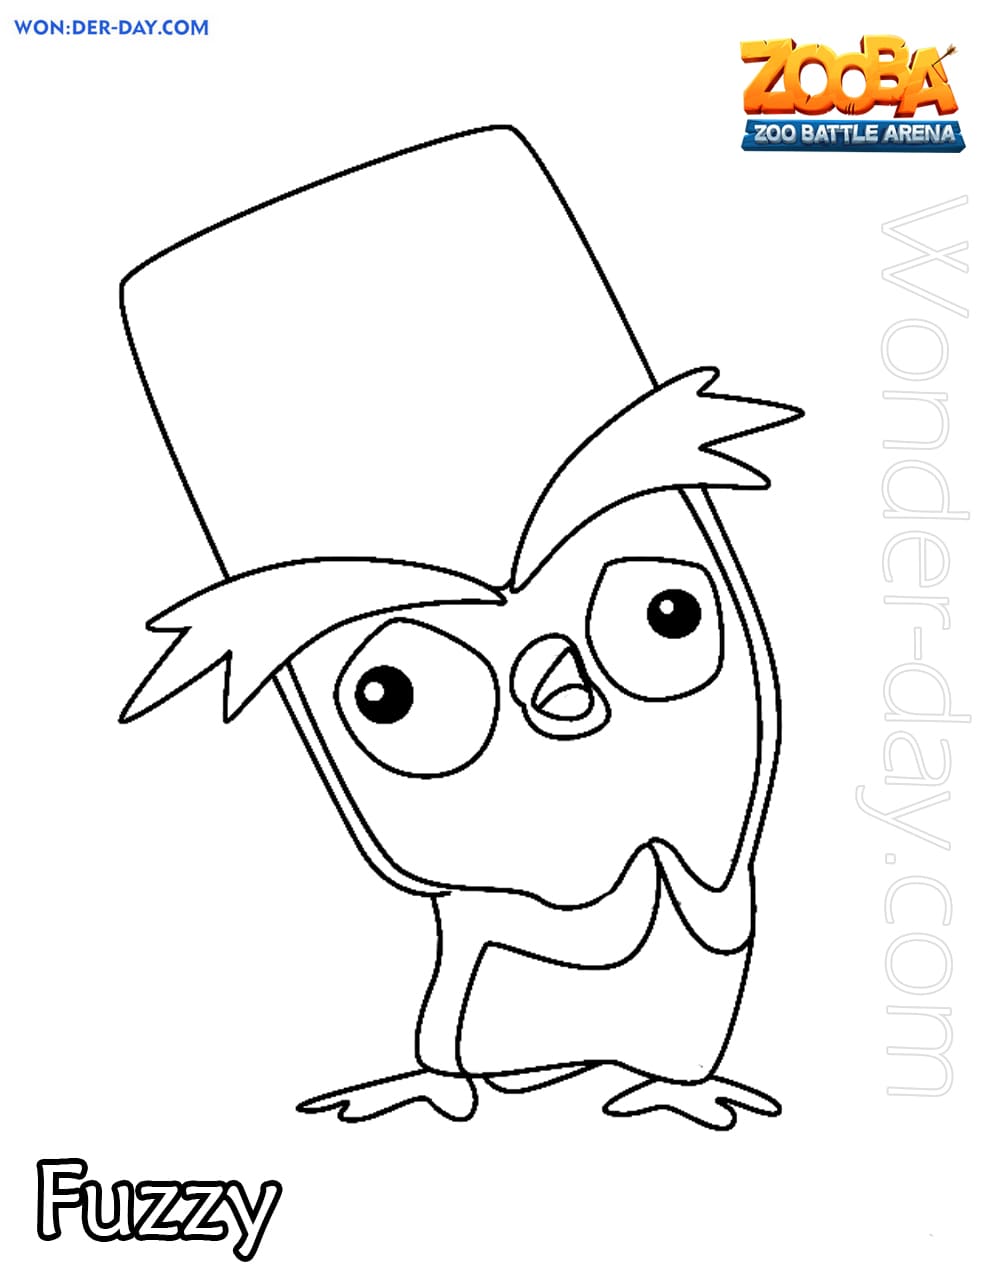 Printable Zooba Coloring Pages - Free Wallpapers HD